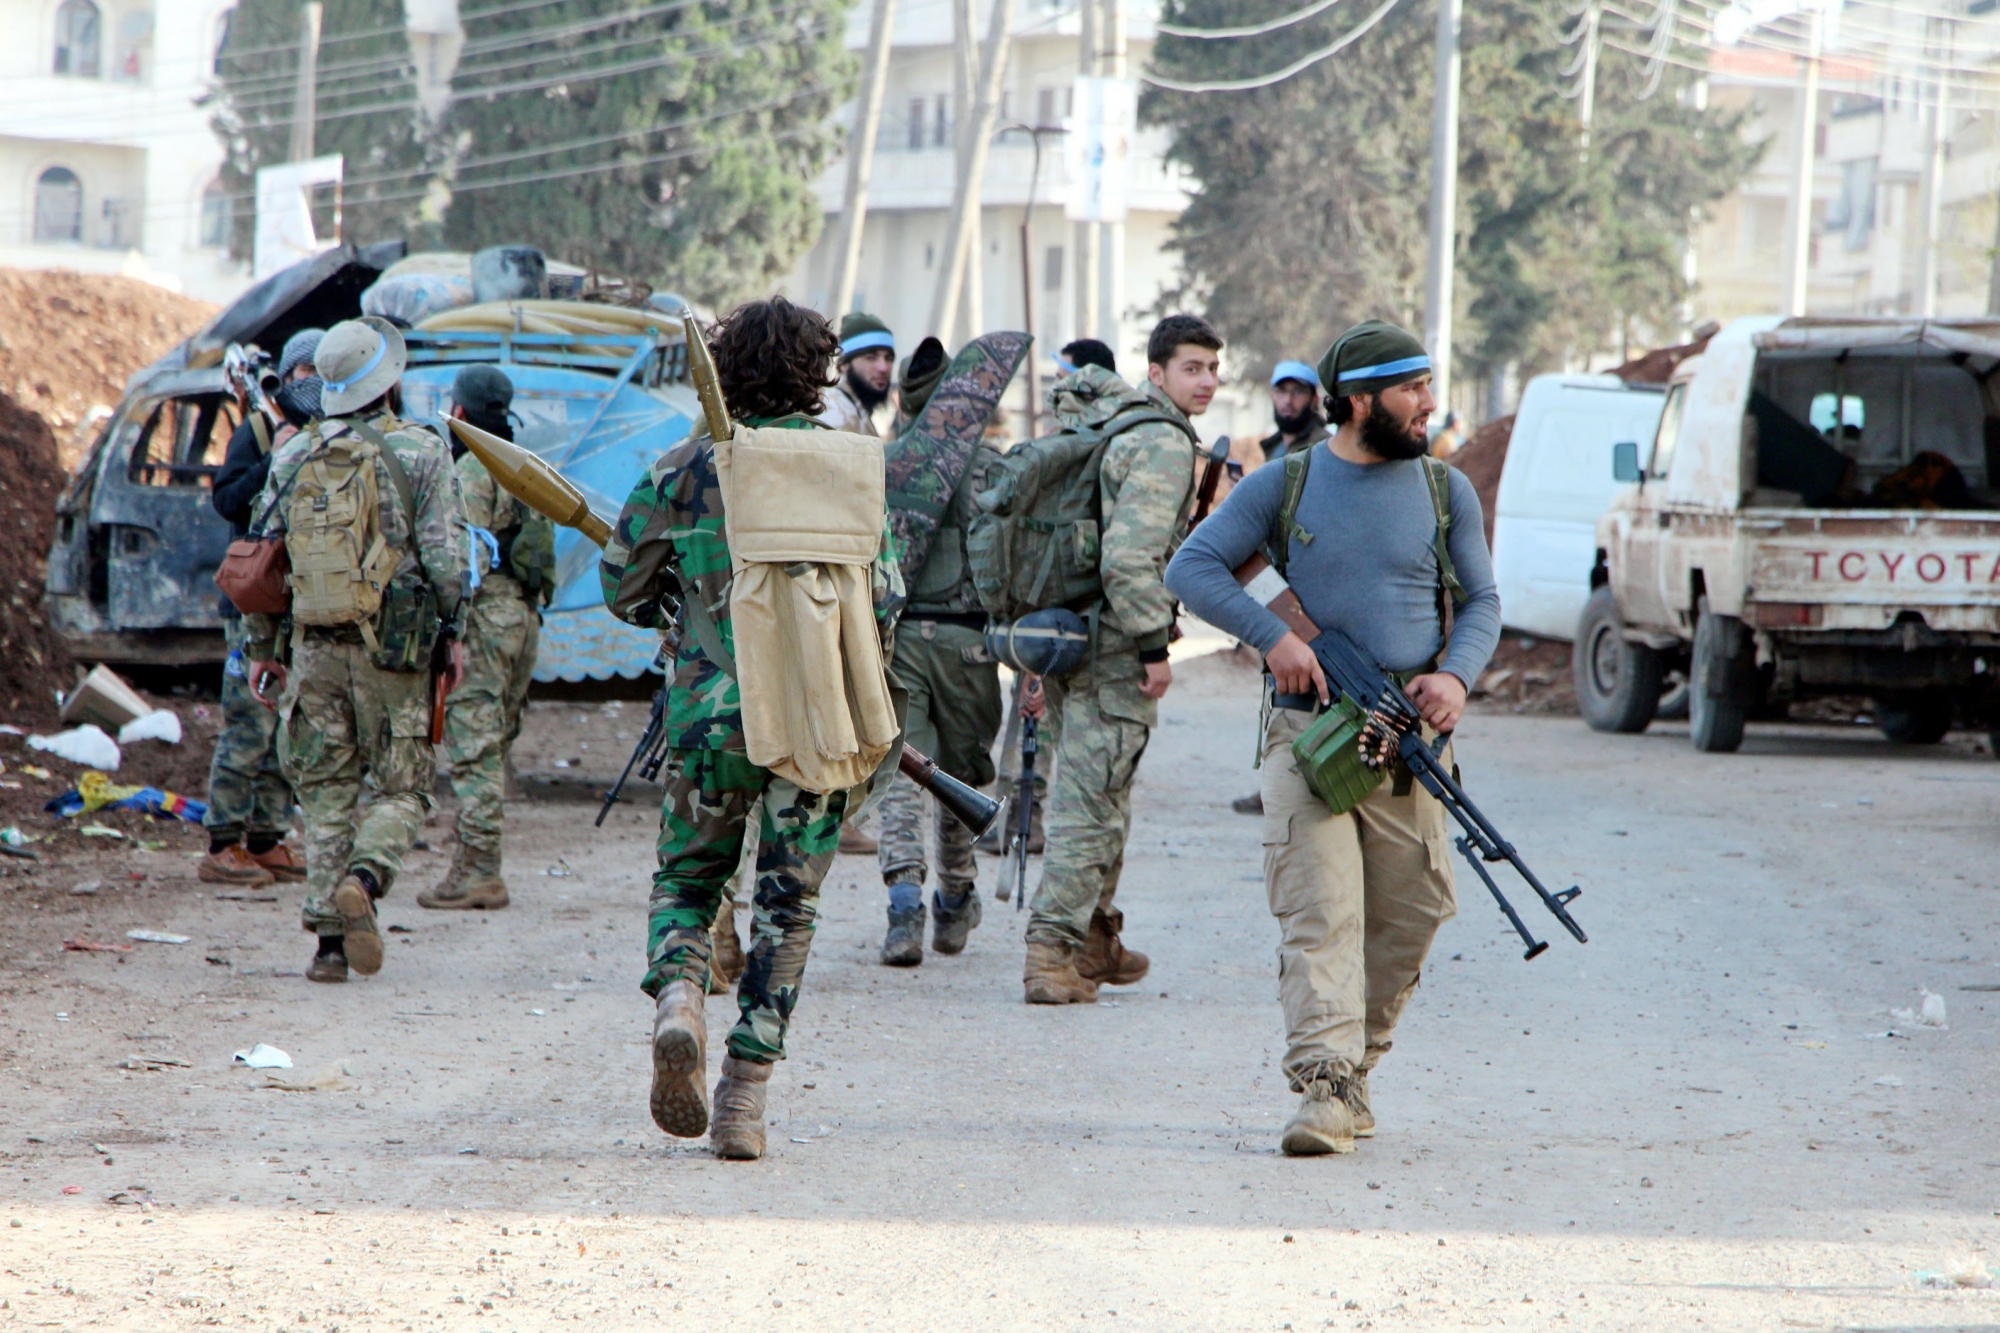 epa06611805 Turkey-backed Free Syrian Army soldiers take control of Afrin city center, Syria, 18 March 2018. According to media reports, the Turkish army and its allied Syrian militias on 10 March continued to encircle the city of Afrin in the Kurdish-held enclave of the same name in northwest Syrian, taking control of nine towns. The Turkish army on 20 January launched 'Operation Olive Branch' in Syria's northern regions against the Kurdish Popular Protection Units (YPG) forces and the Syrian Democratic Forces (SDF) which control the city of Afrin. Turkey classifies the YPG as a terrorist organization. The Turkish-backed Free Syrian Army is an armed rebel military group that operates in northern Syria and is supported by the Turkish army.  EPA/DHA / DOGAN NEWS AGENCY SYRIA AFRIN TURKEY YPG